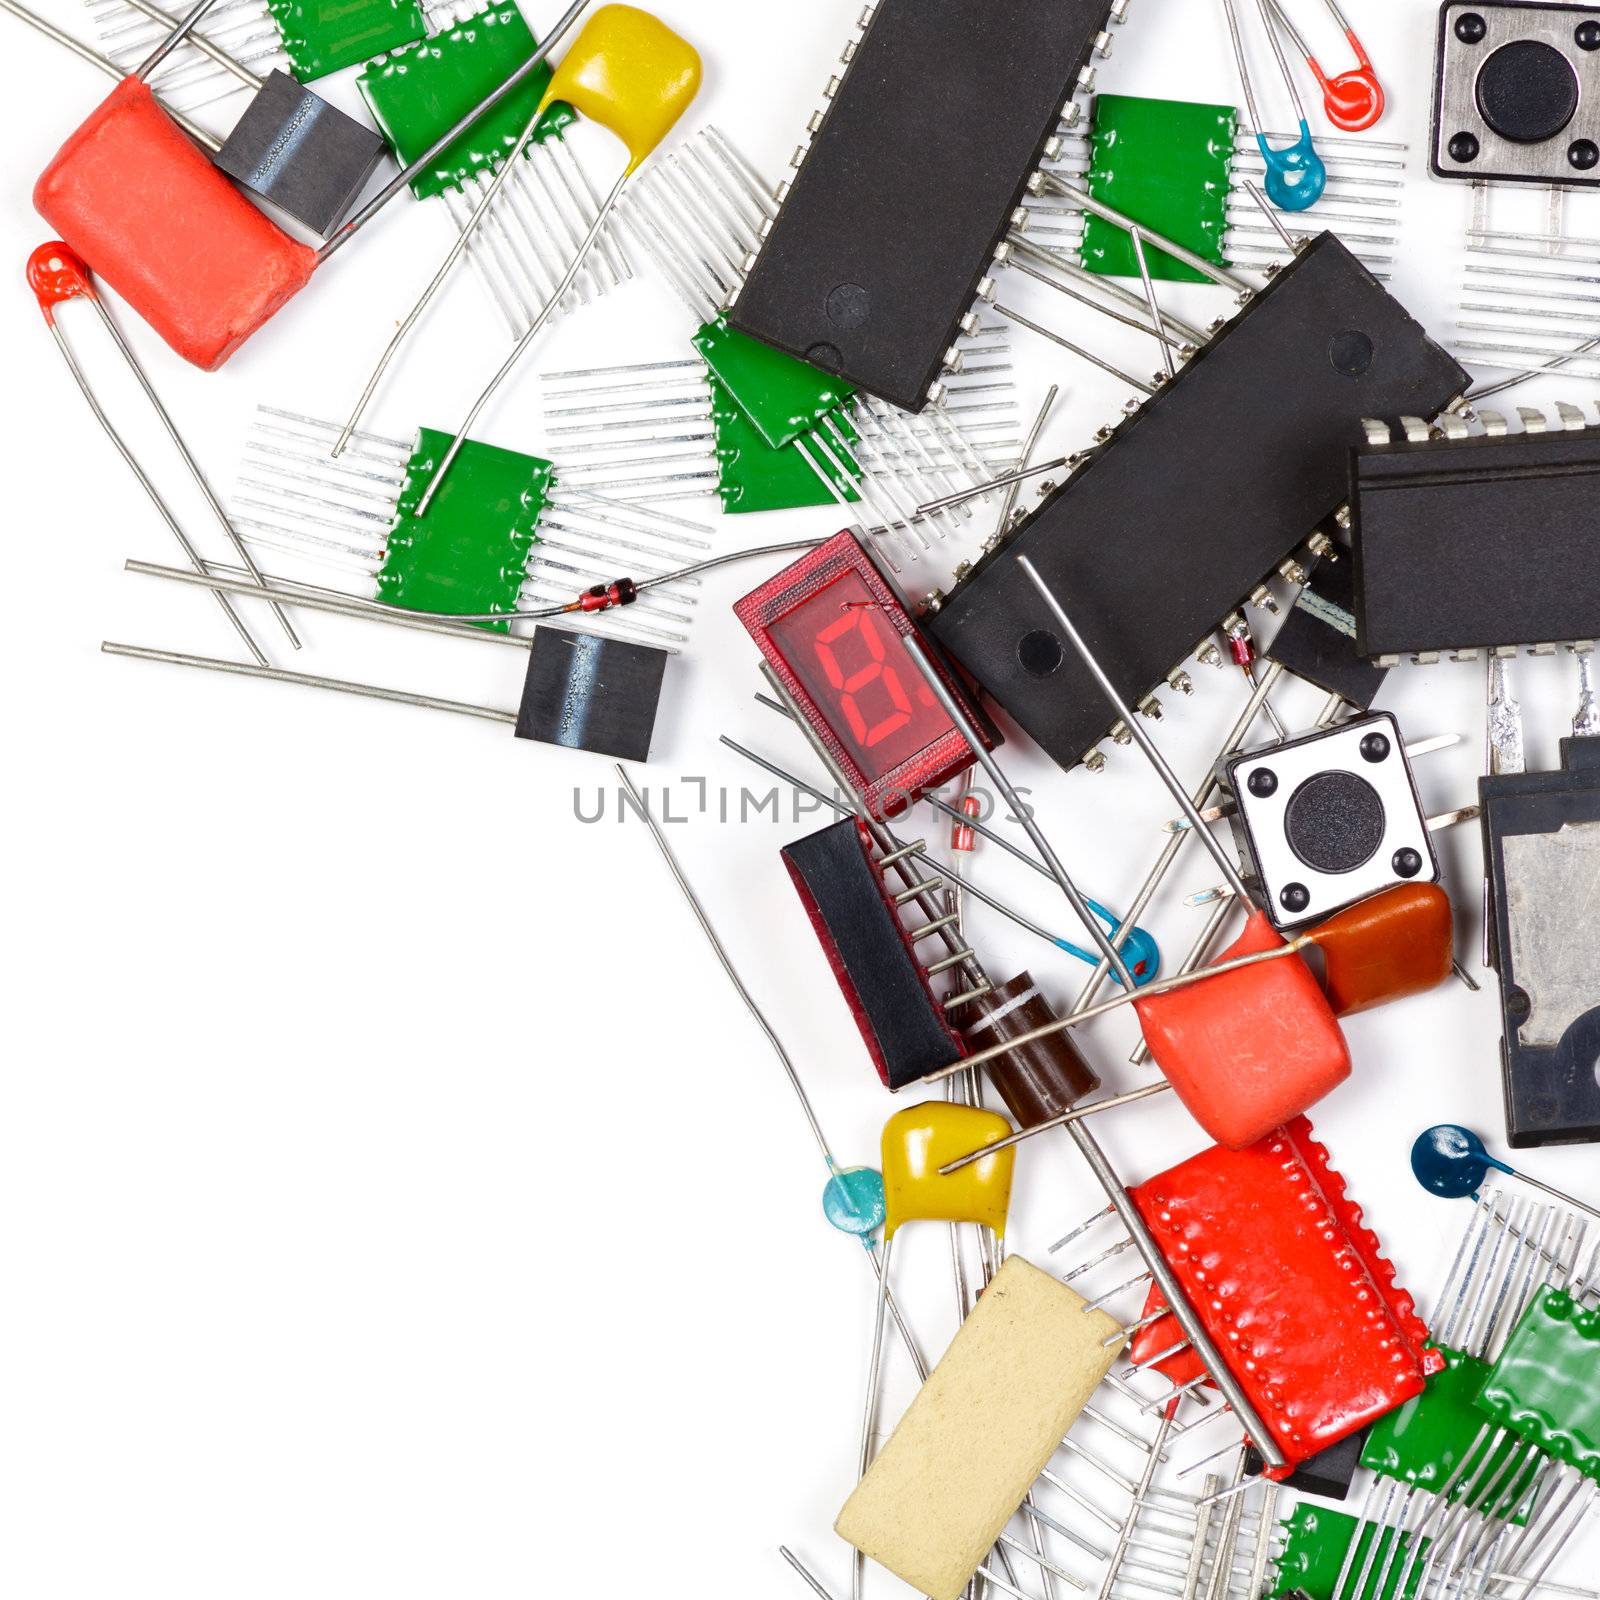 Electronic components on white background